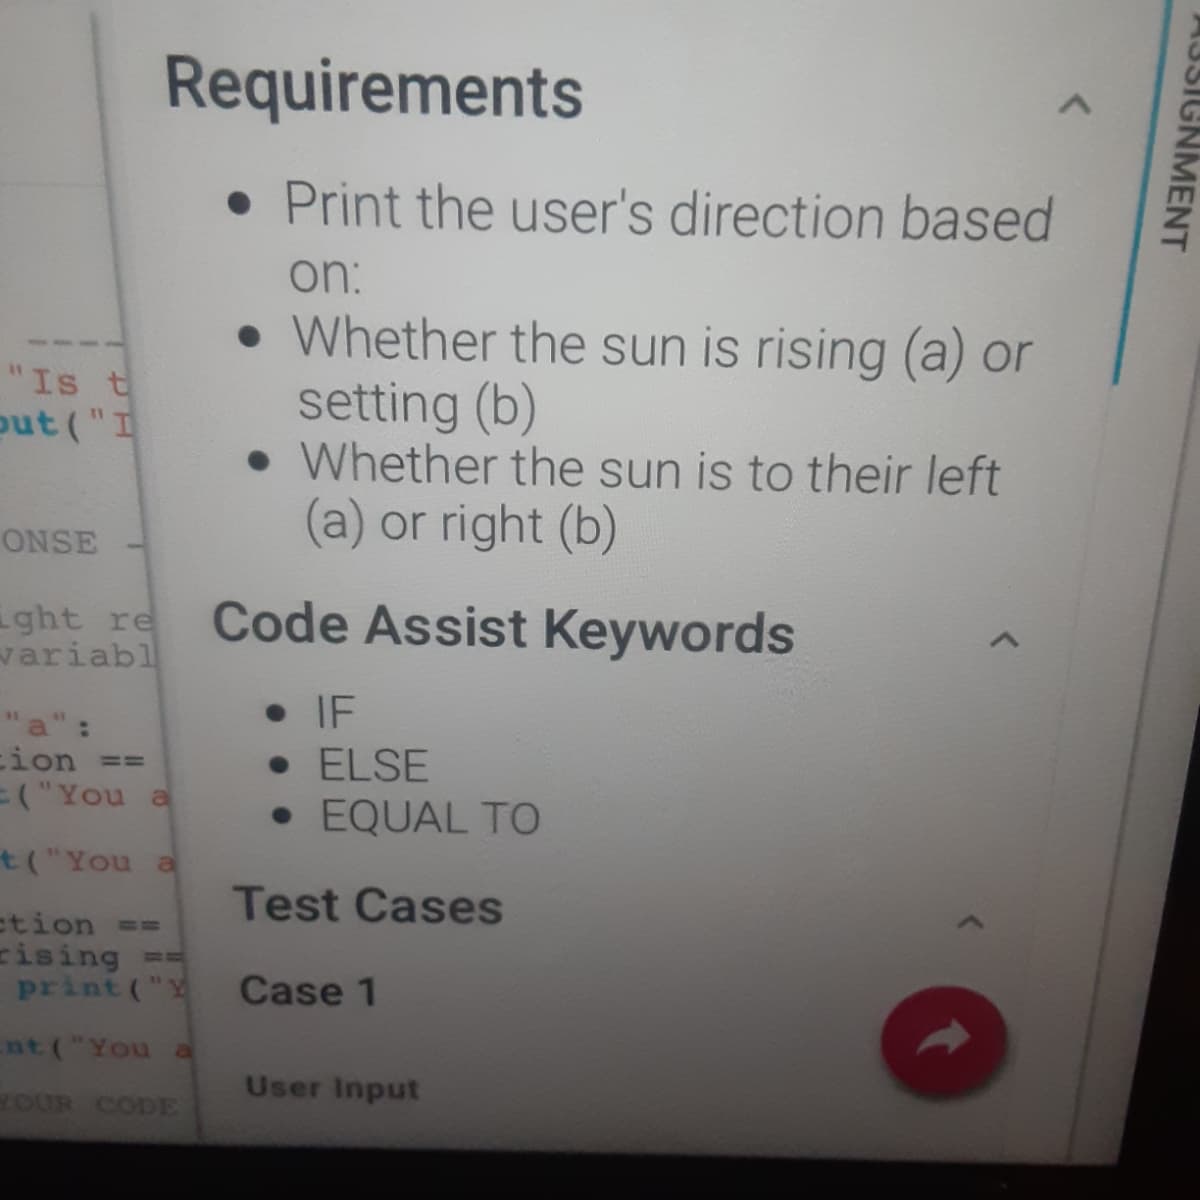 Requirements
• Print the user's direction based
on:
Whether the sun is rising (a) or
setting (b)
• Whether the sun is to their left
(a) or right (b)
"Is t
out ("I
ONSE
ght re
variabl
Code Assist Keywords
a":
cion ==
3("You a
• IF
• ELSE
• EQUAL TO
t("You a
Test Cases
ction ==
cising ==
print ("Y
Case 1
nt("You a
User Input
OUR CODE
AJSIGNMENT
